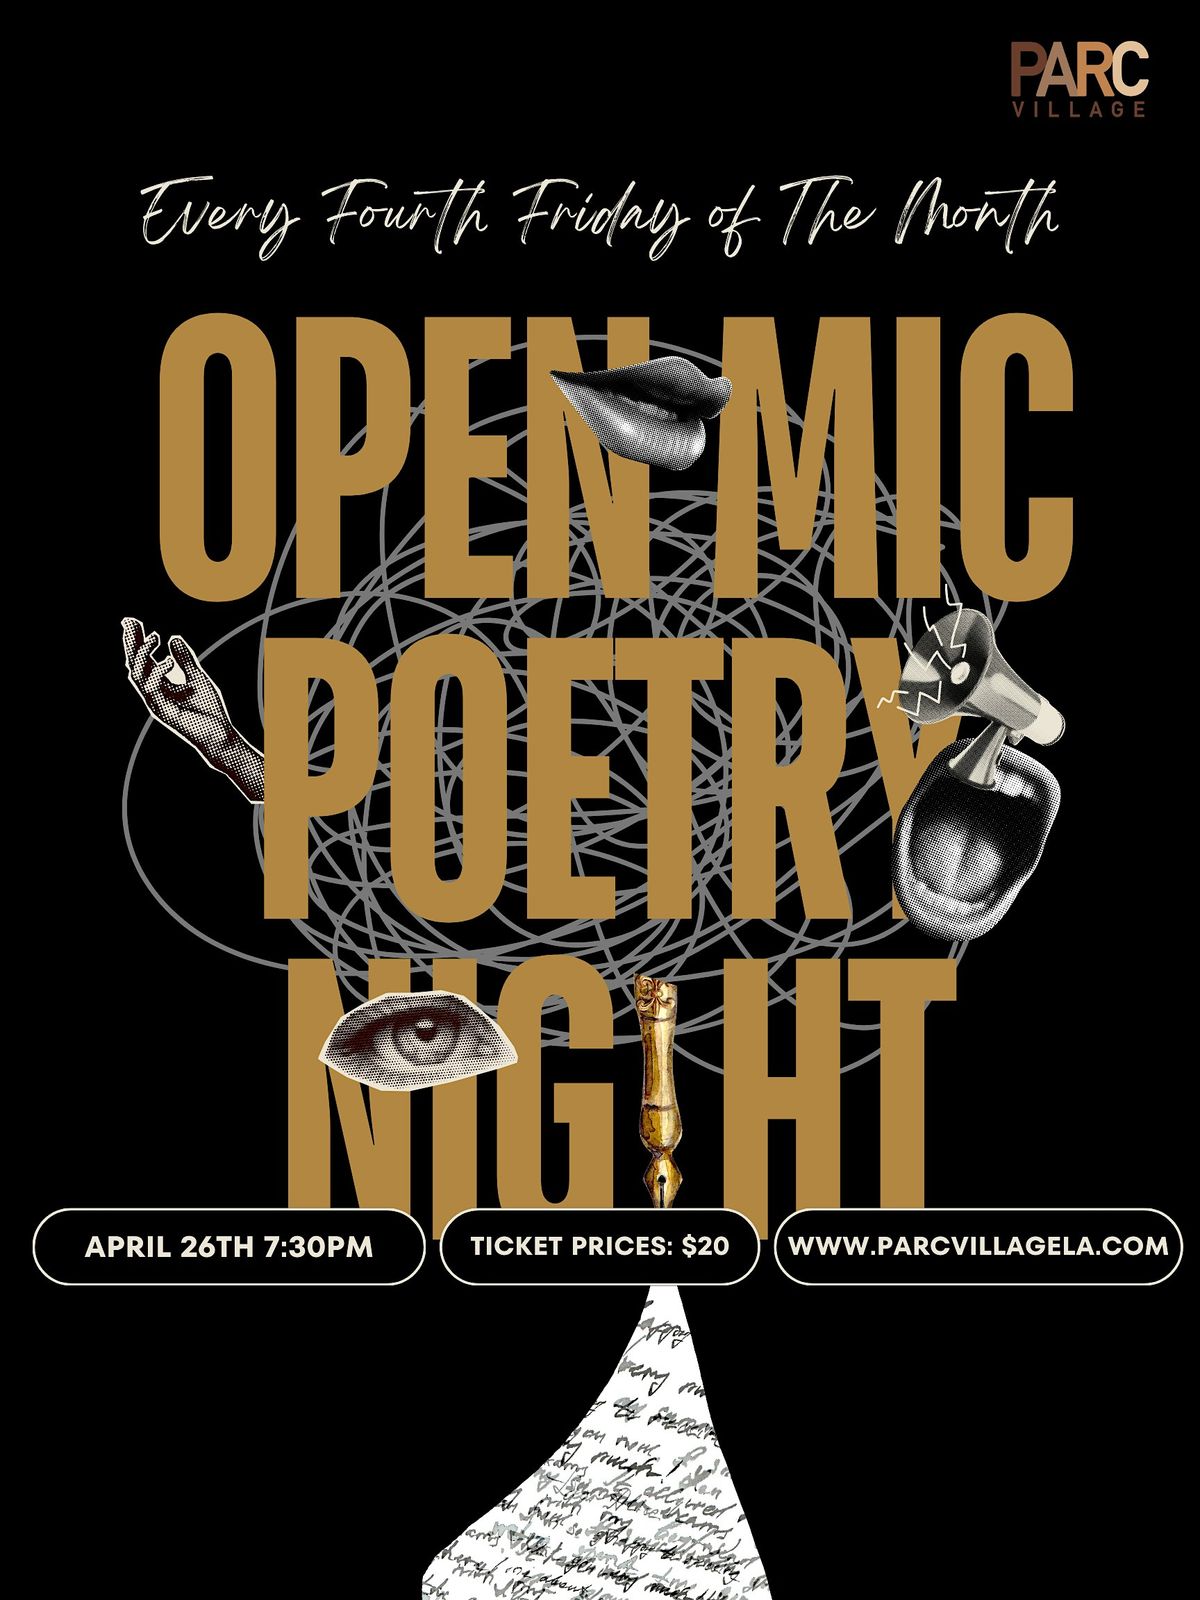 Open Mic Poetry Night: Every 3rd Friday of the Month